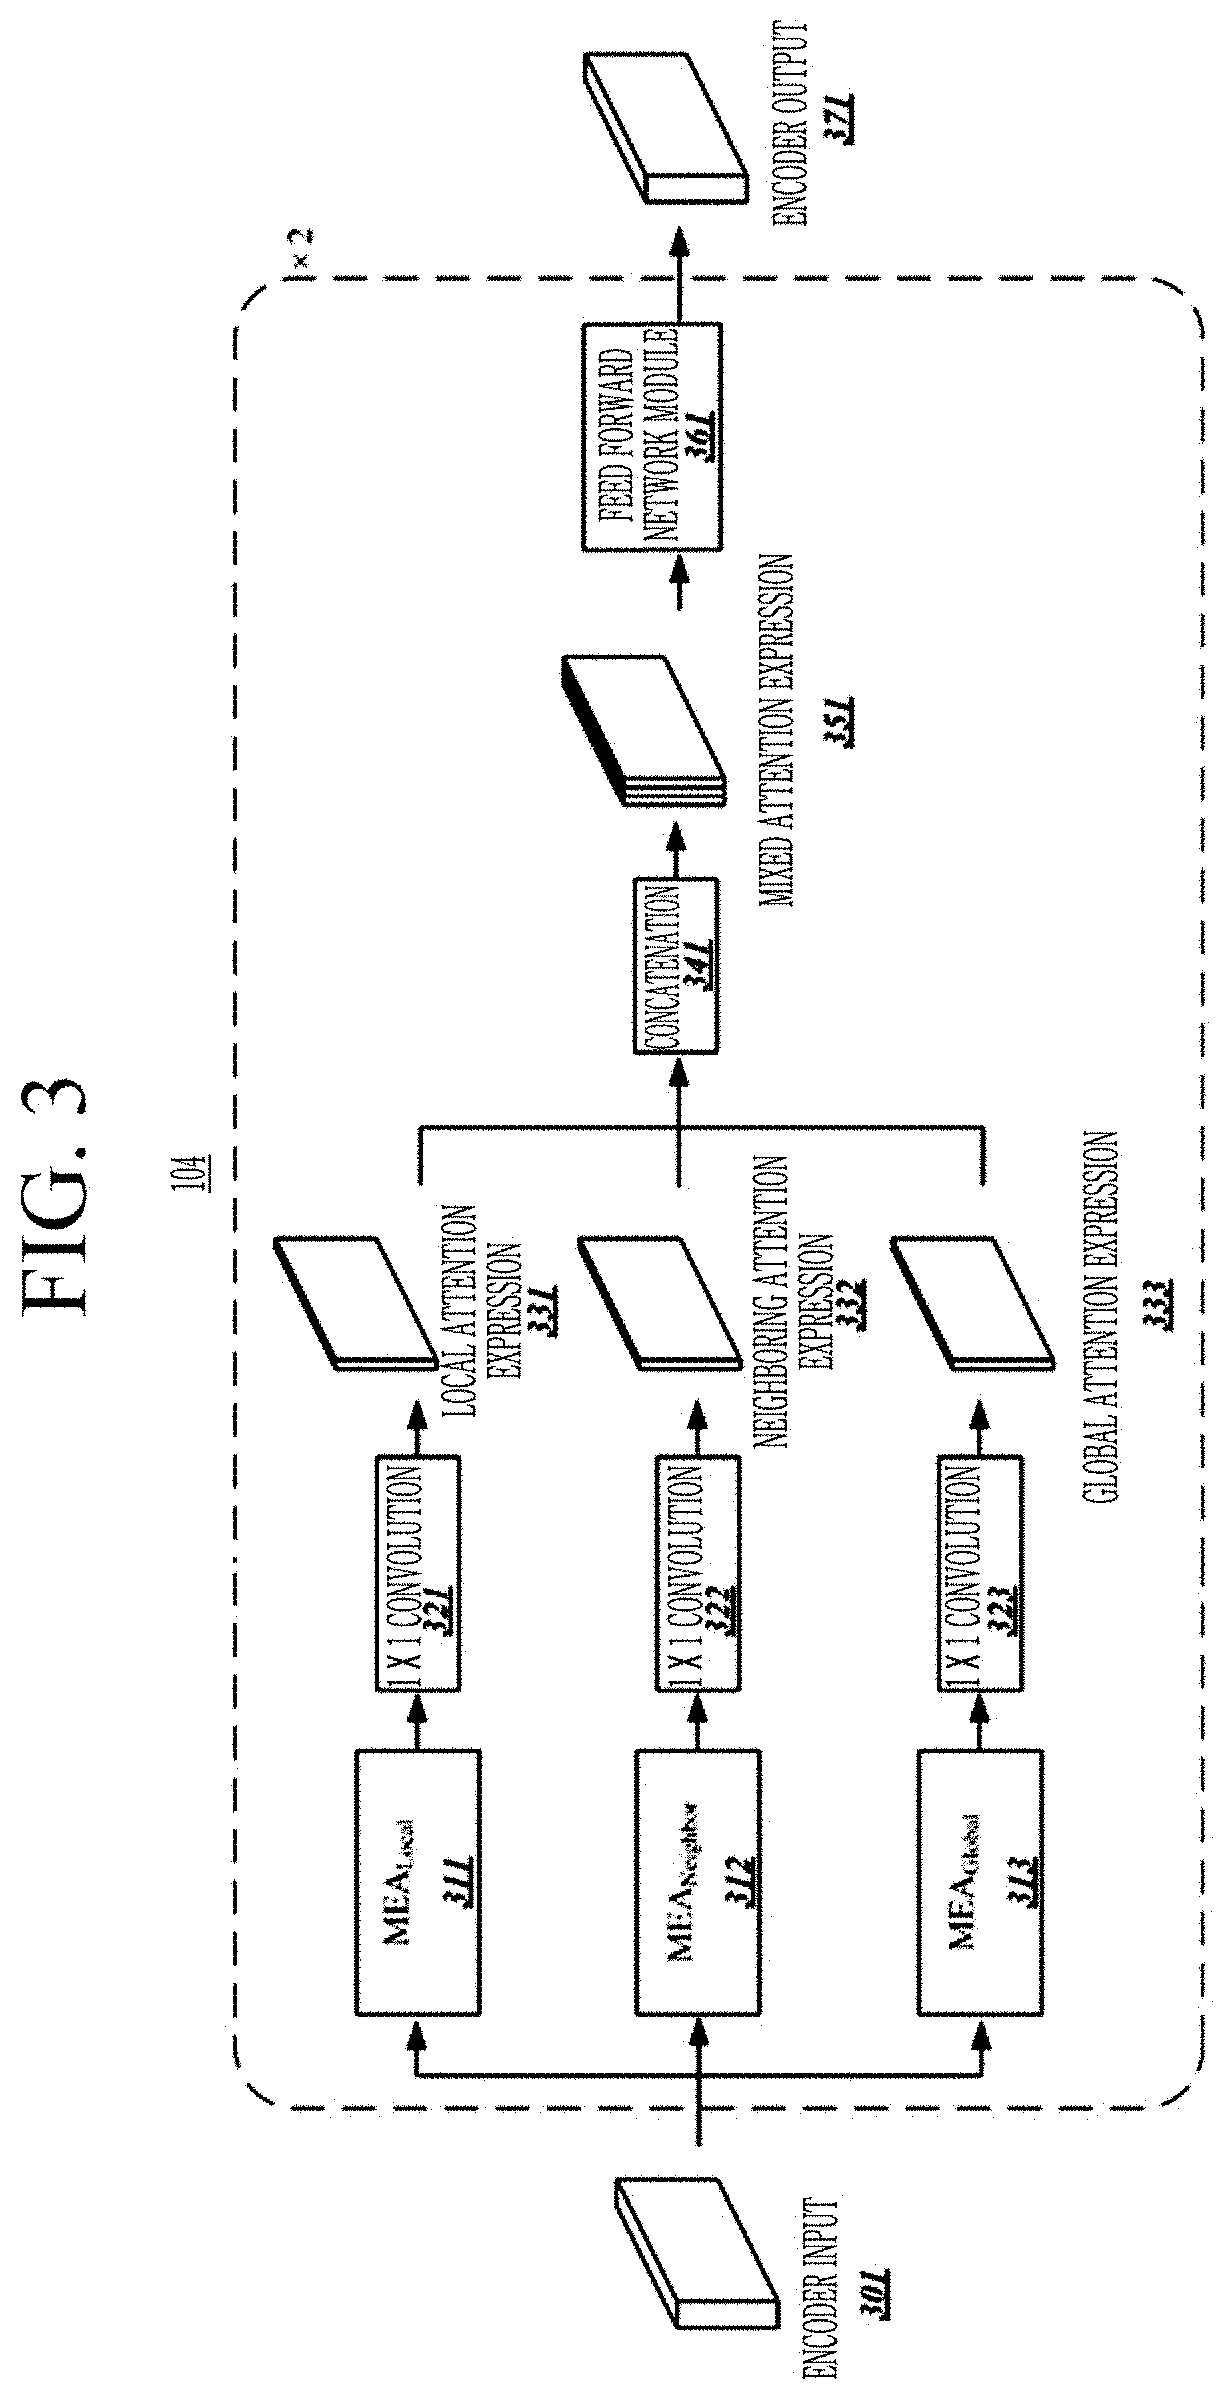 Multi-directional scene text recognition method and system based on multi-element attention mechanism